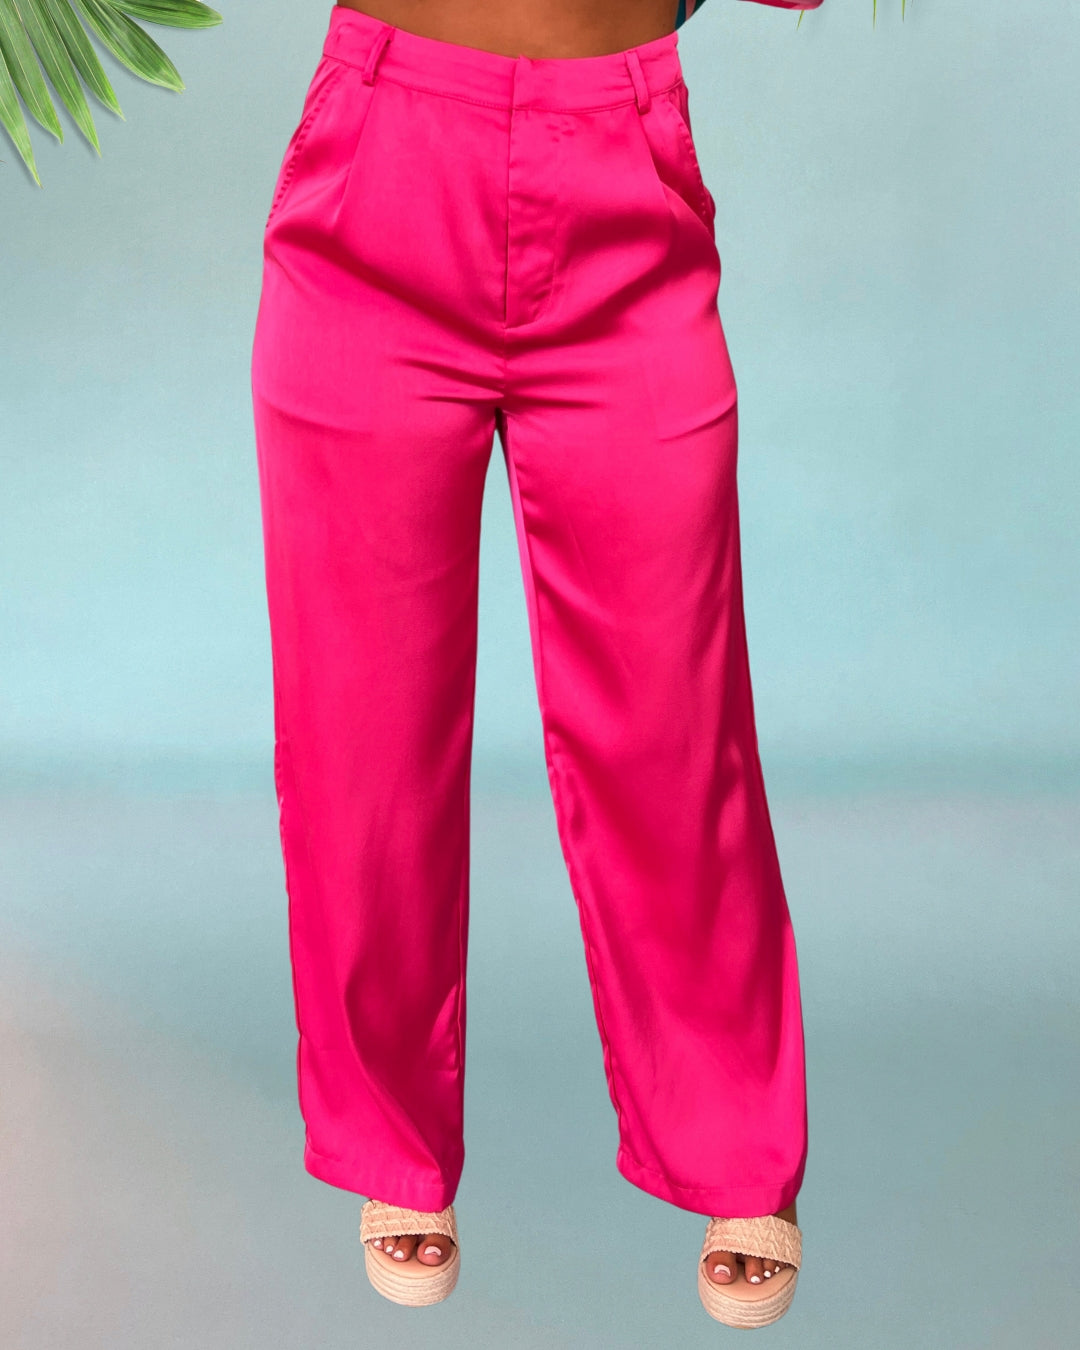 Life Of The Party Hot Pink Satin Trouser Pants